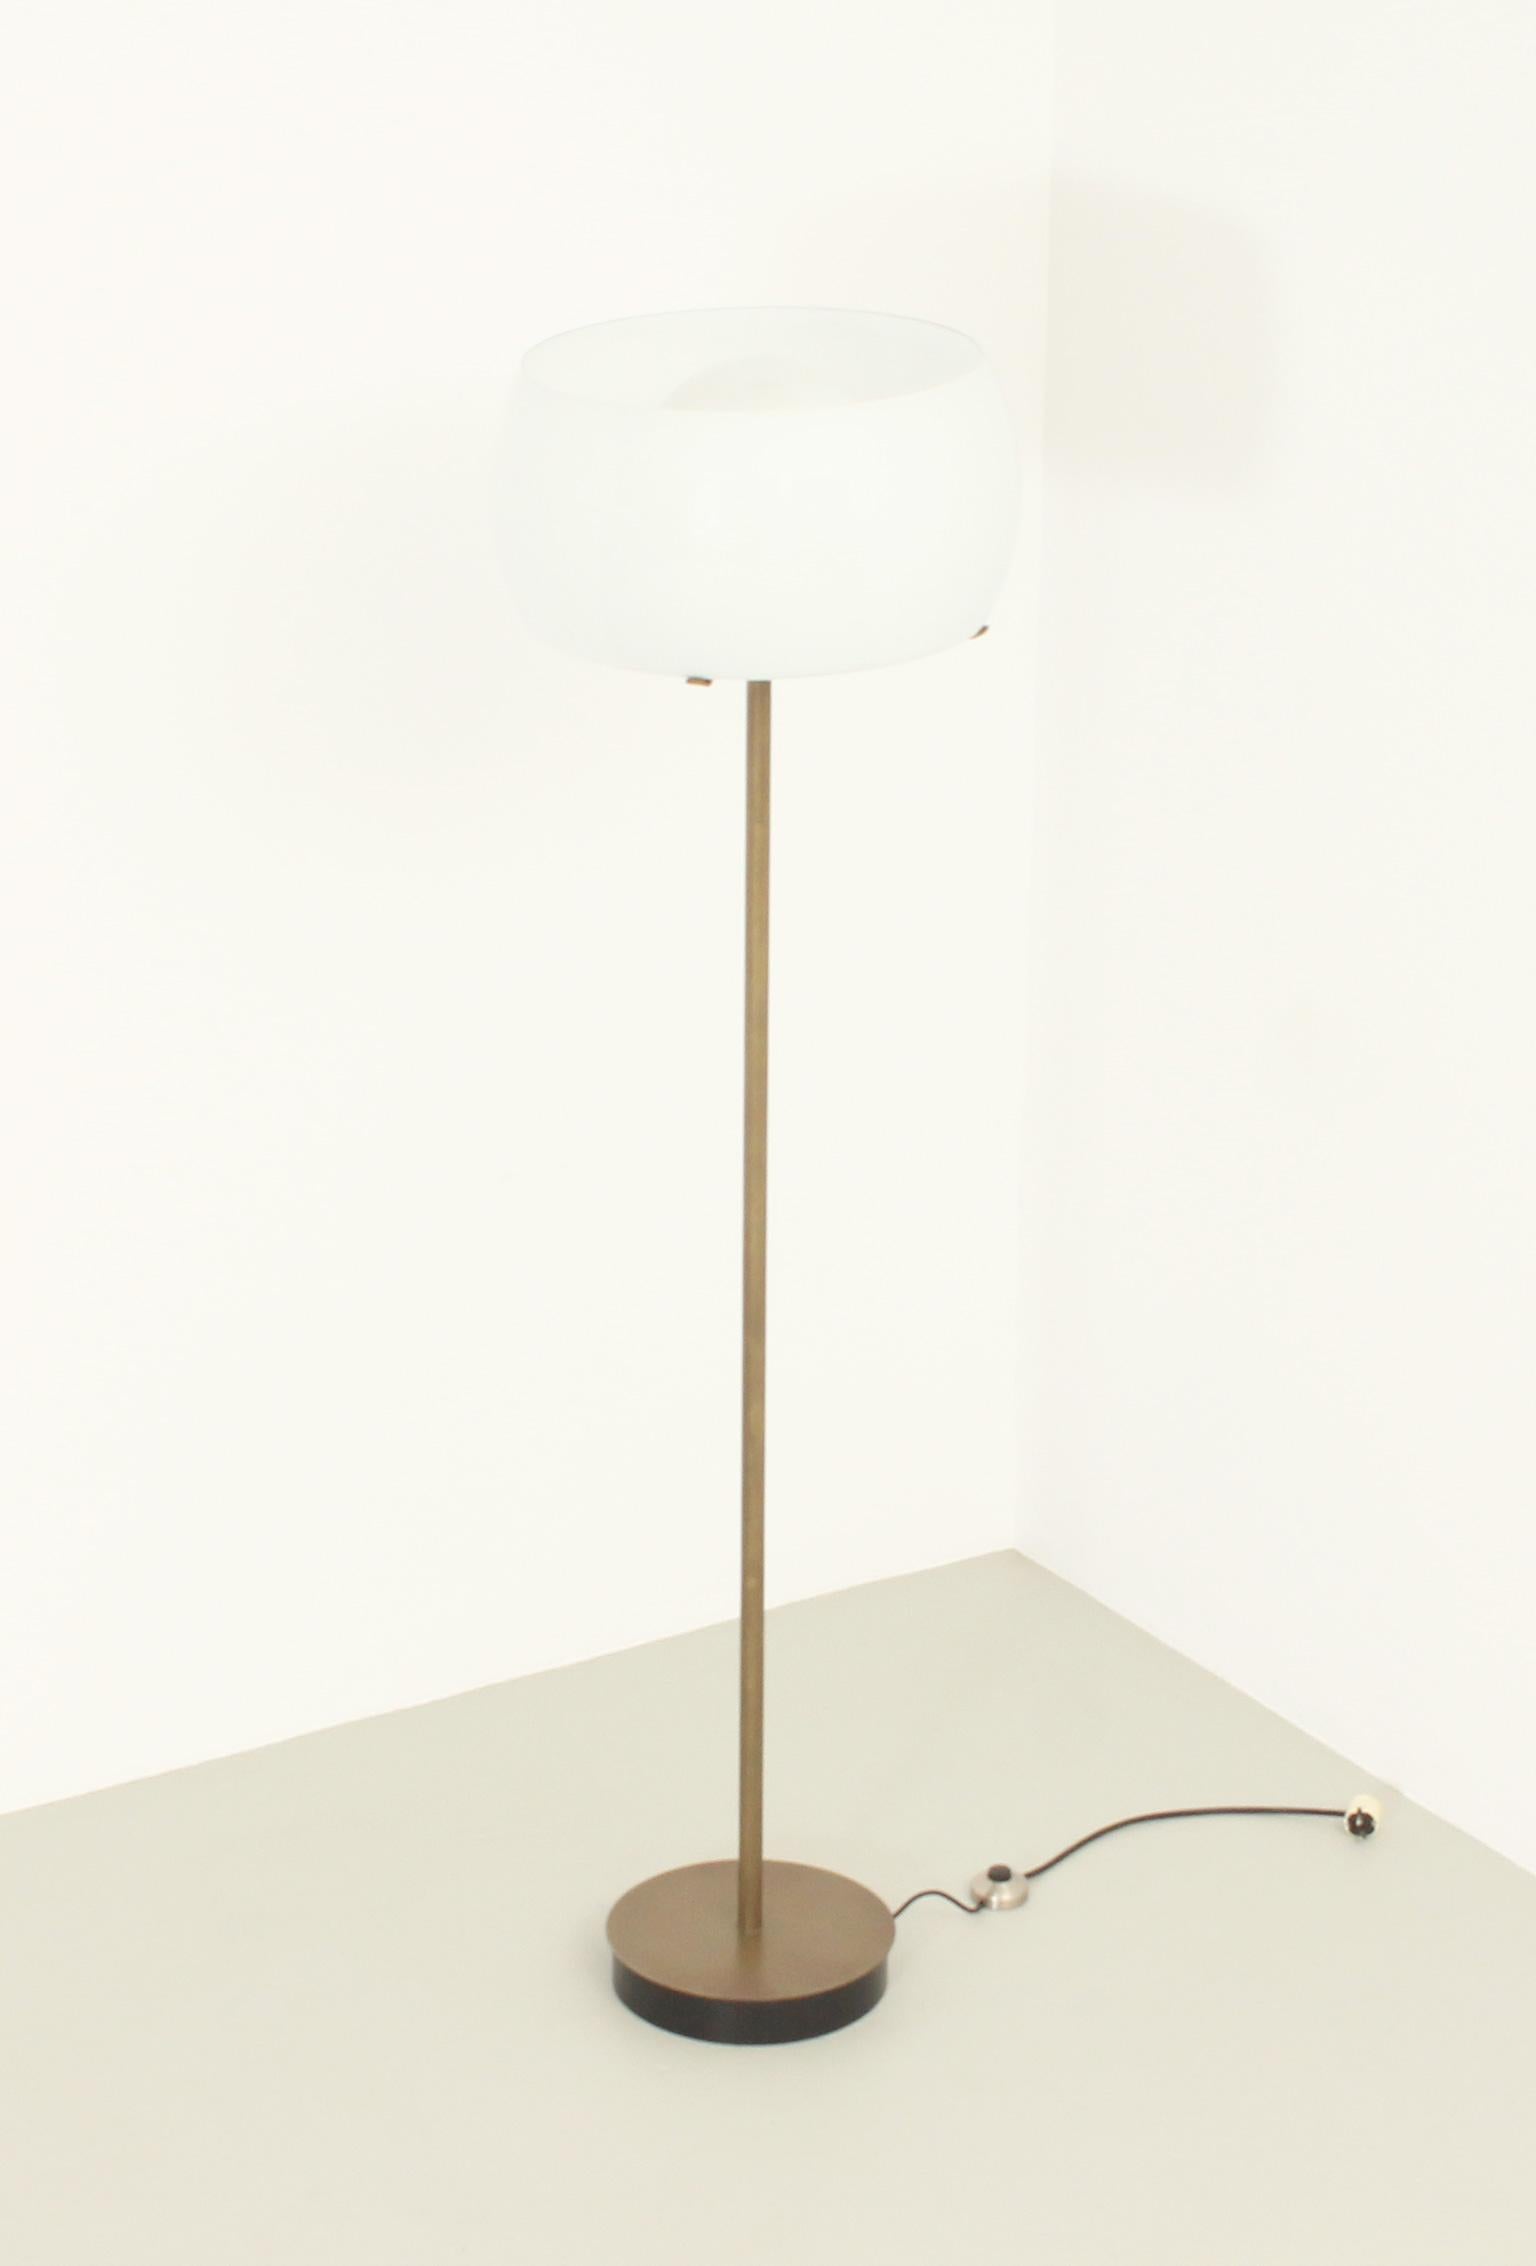 Clitunno floor lamp designed in 1963 by Vico Magistretti for the Italian company Artemide. Rare edition in bronze finished and opal glass.